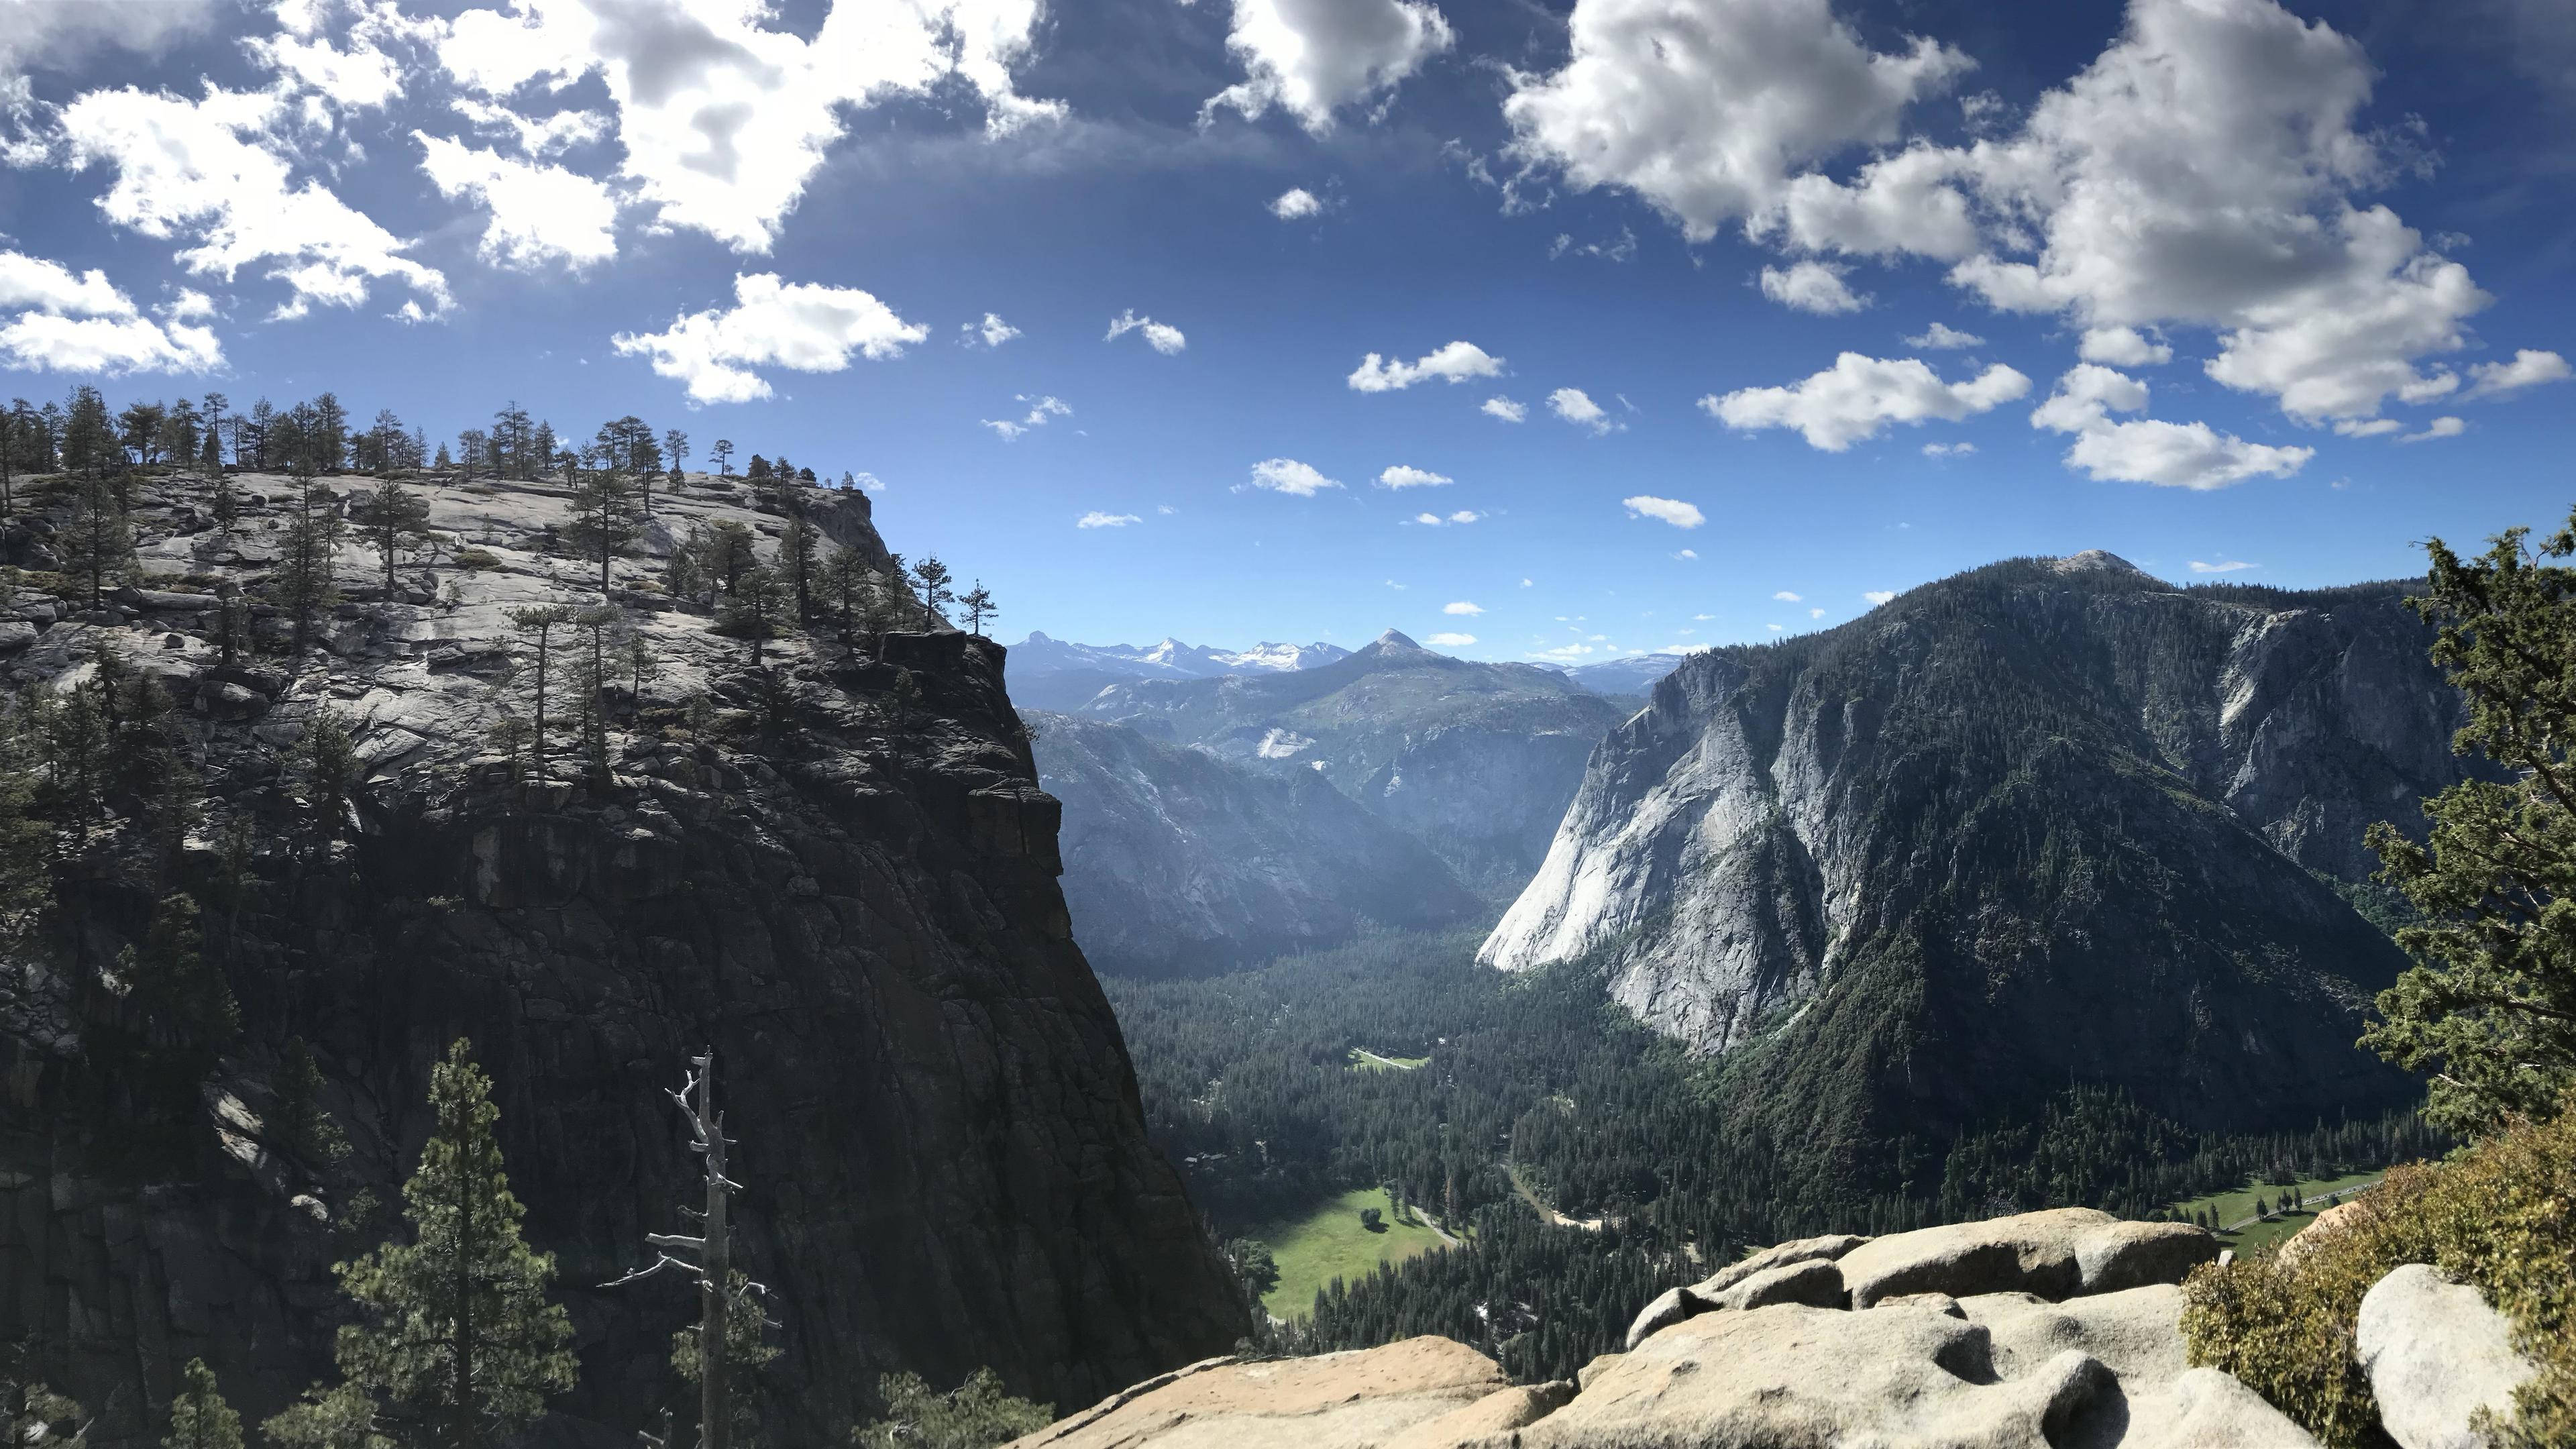 Yosemite Valley And Cloudy Sky Background